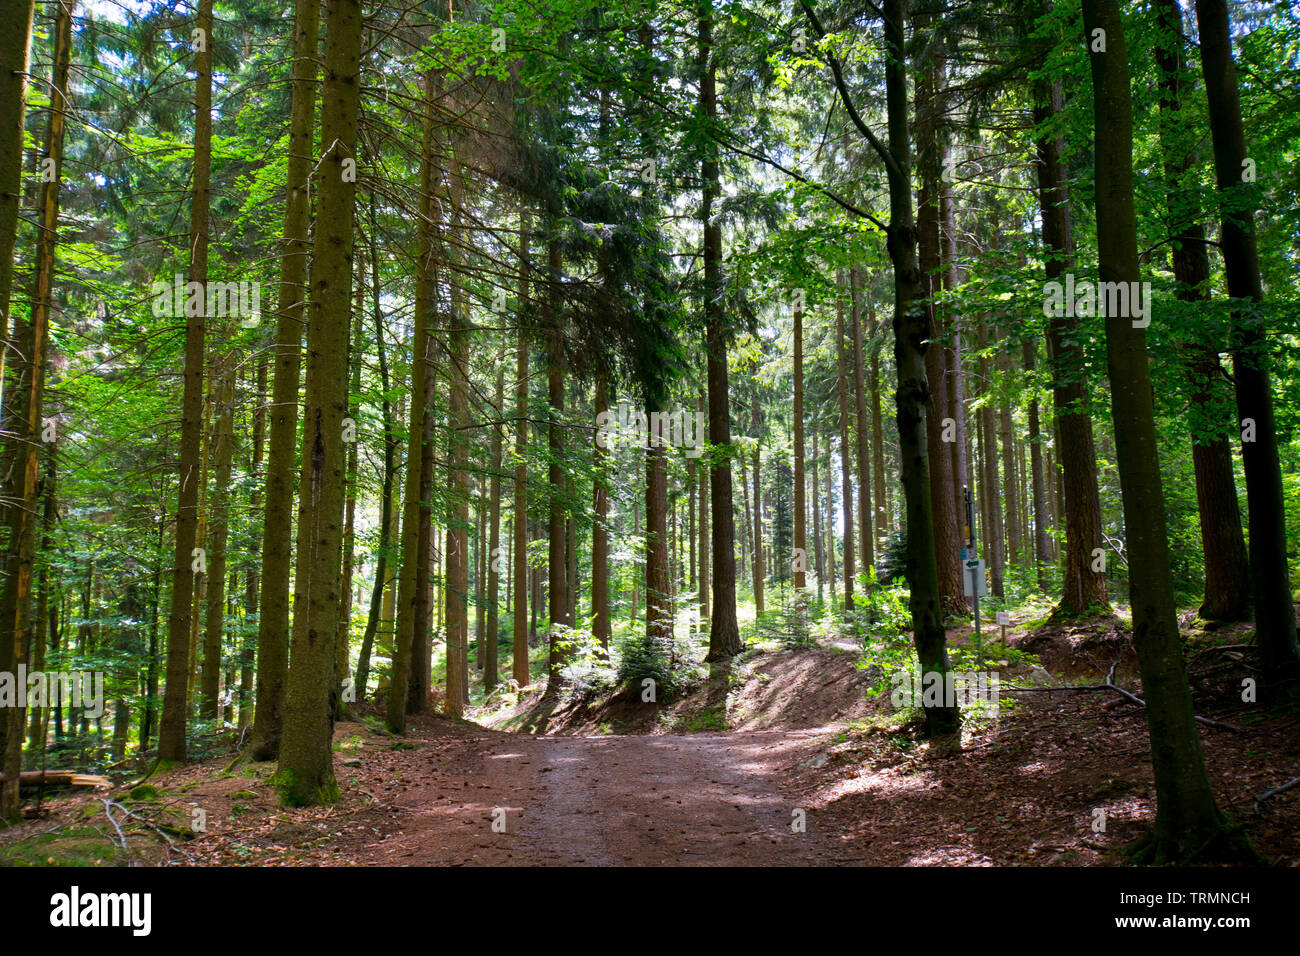 Forest in the heights of Sasbachwalden in the black forest in germany Stock Photo